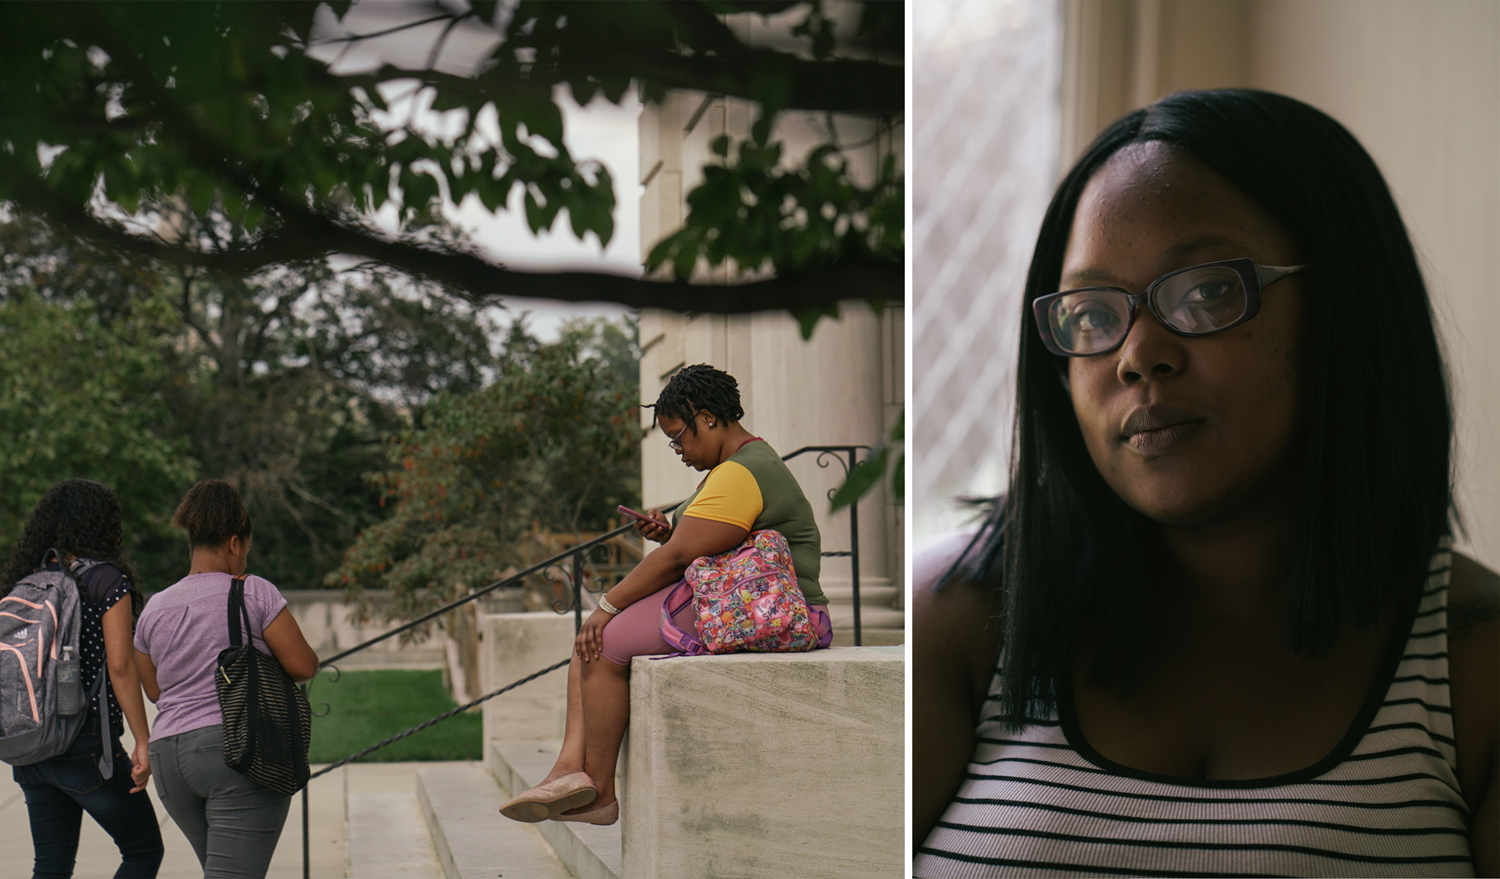 “I try notto go off when people talk negatively about the homeless,” Bre said.“I always tell people, you never know. Be grateful for what you have because you never know. It could be gone like that.”